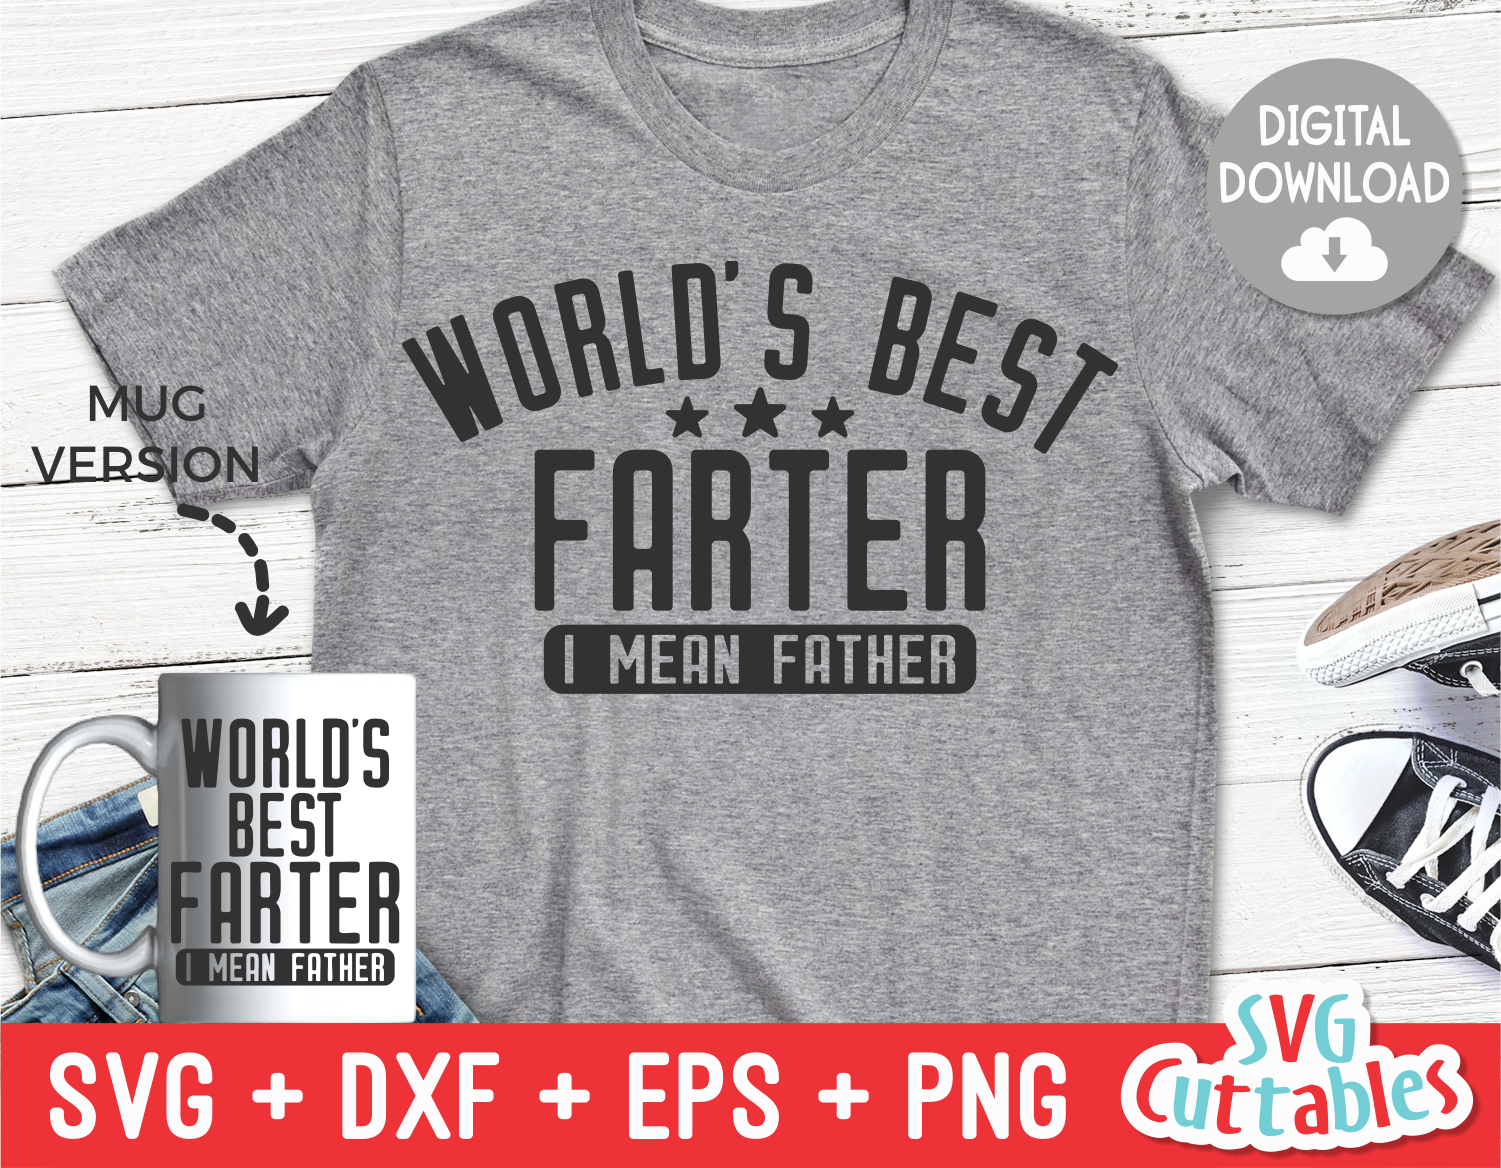 World's Best Farter | Father's Day | SVG Cut File ...